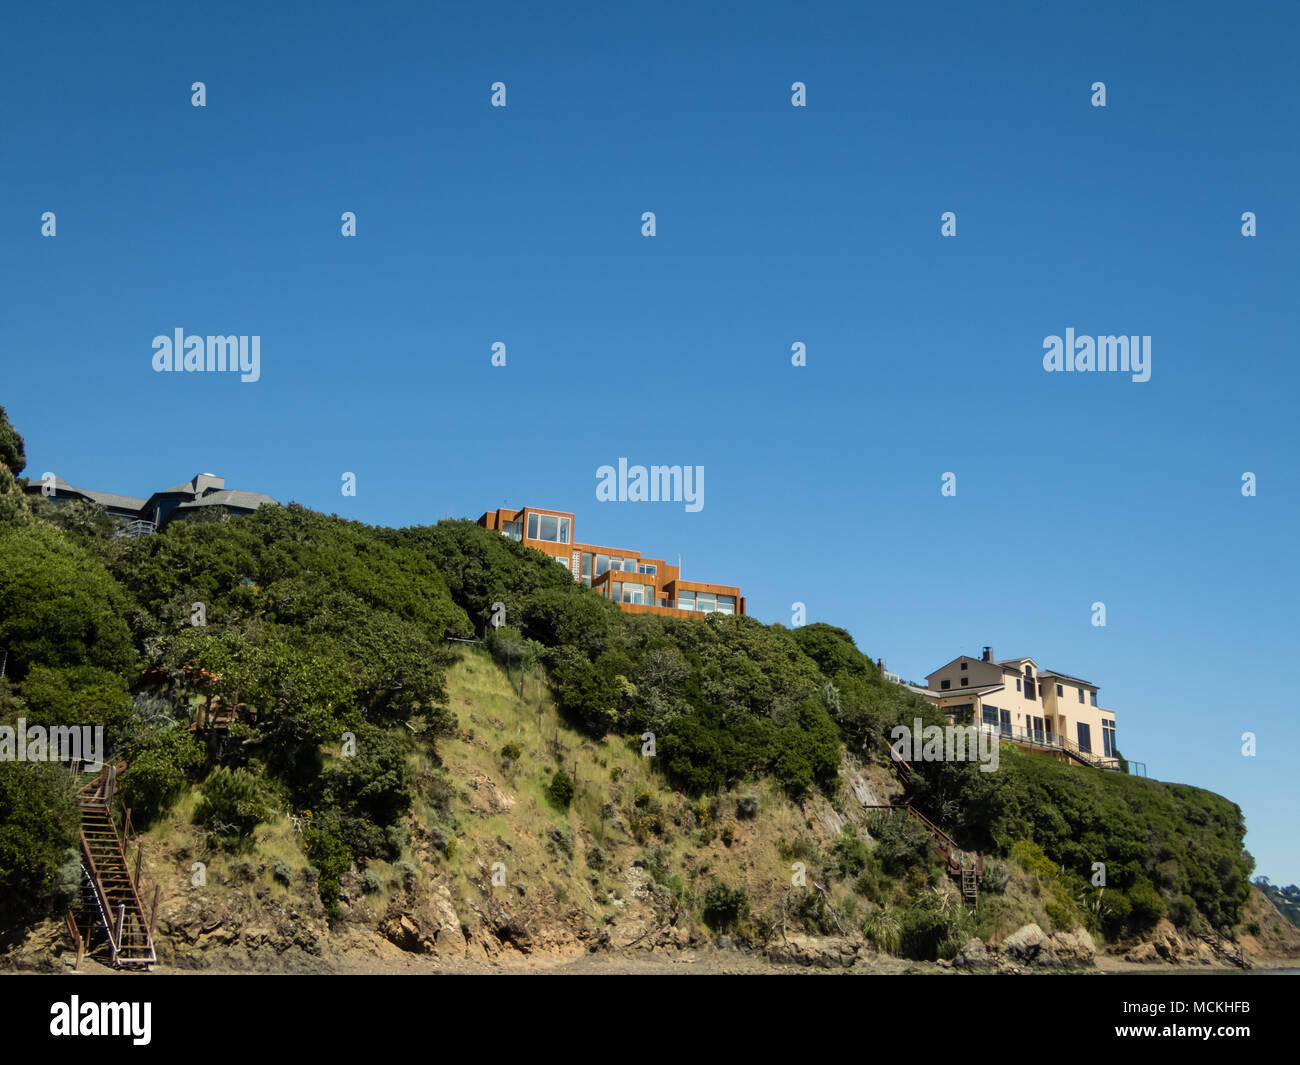 Houses with red tile roofs on edge of a cliff Marin county, CA Stock Photo